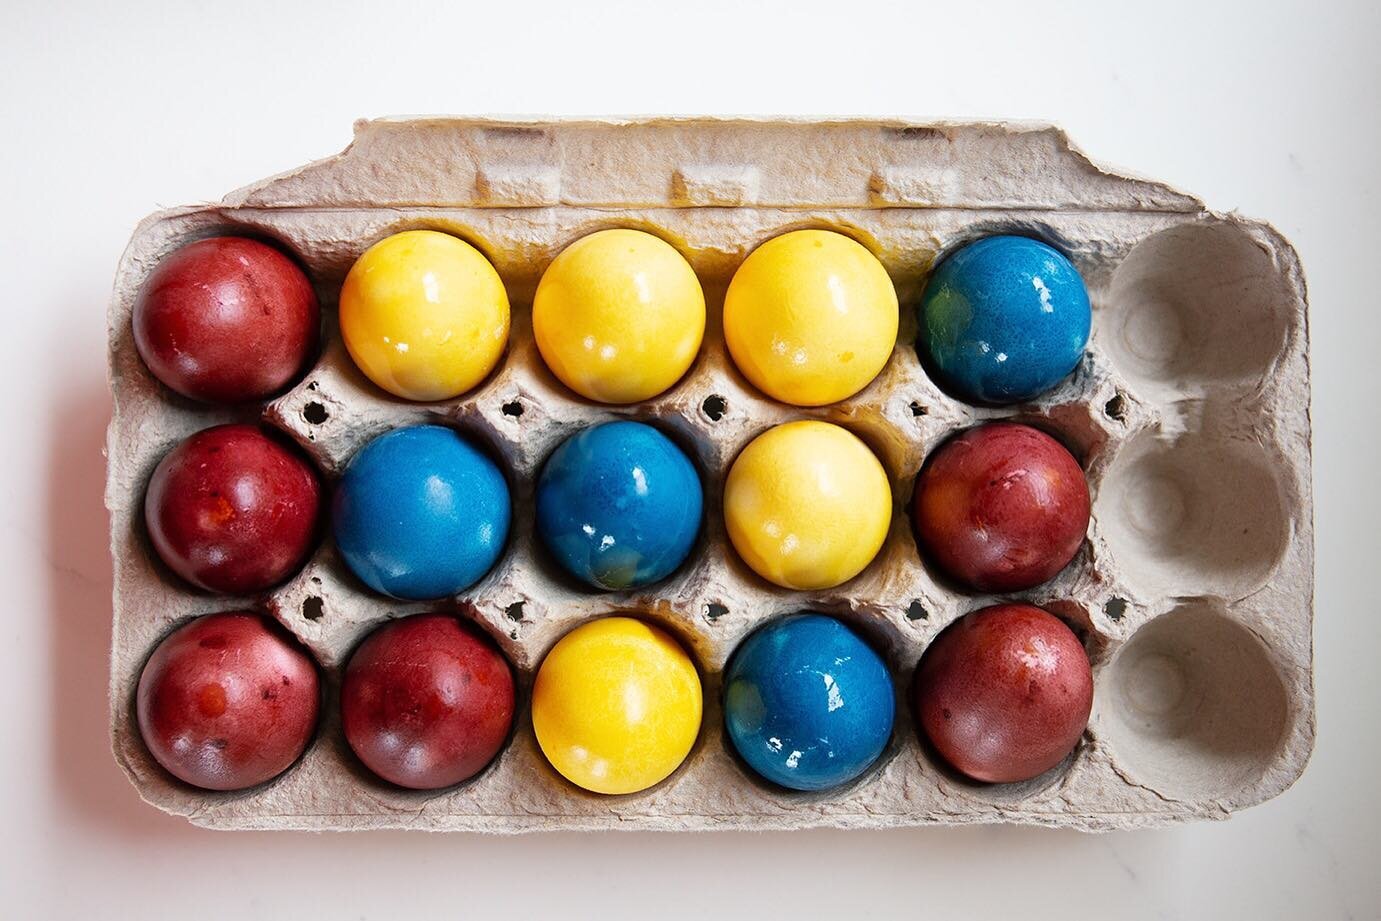 Forget the pastel tones and go VIBRANT with Easter eggs this year! These burgundy, denim-blue, and yellow eggs were naturally dyed with only vegetables and spices 💥 the recipes land in inboxes tomo! (sign up to receive &ldquo;Recipe of the Month&rdq